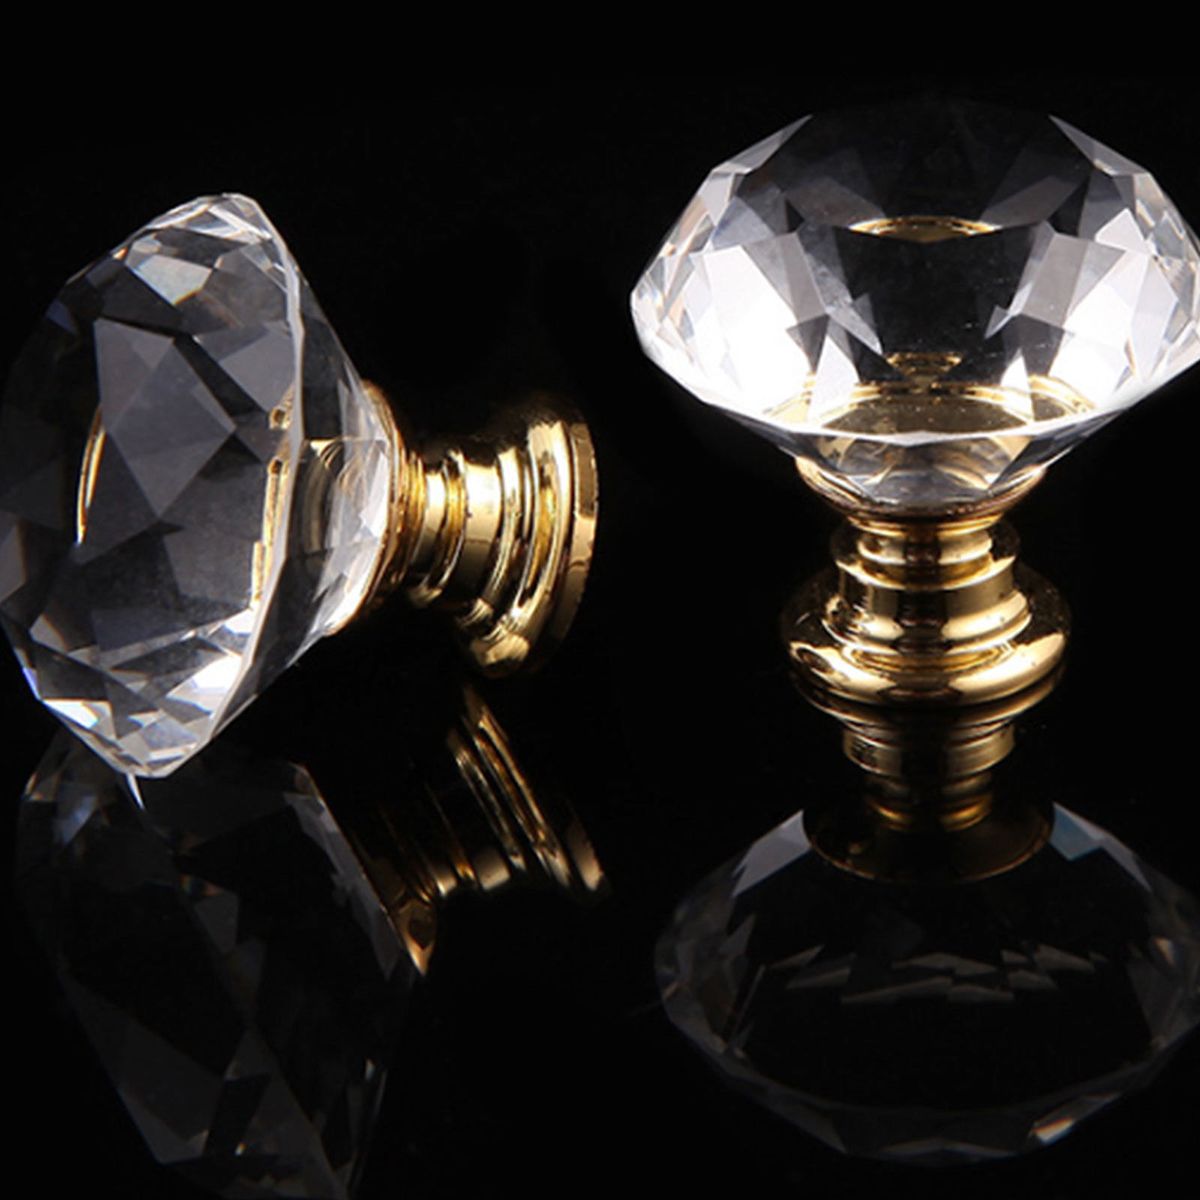 1410PCS-Gold-Base-30mm-Clear-Crystal-Door-Knobs-Kitchen-Cabinet-Drawer-Pull-Handle-1453793